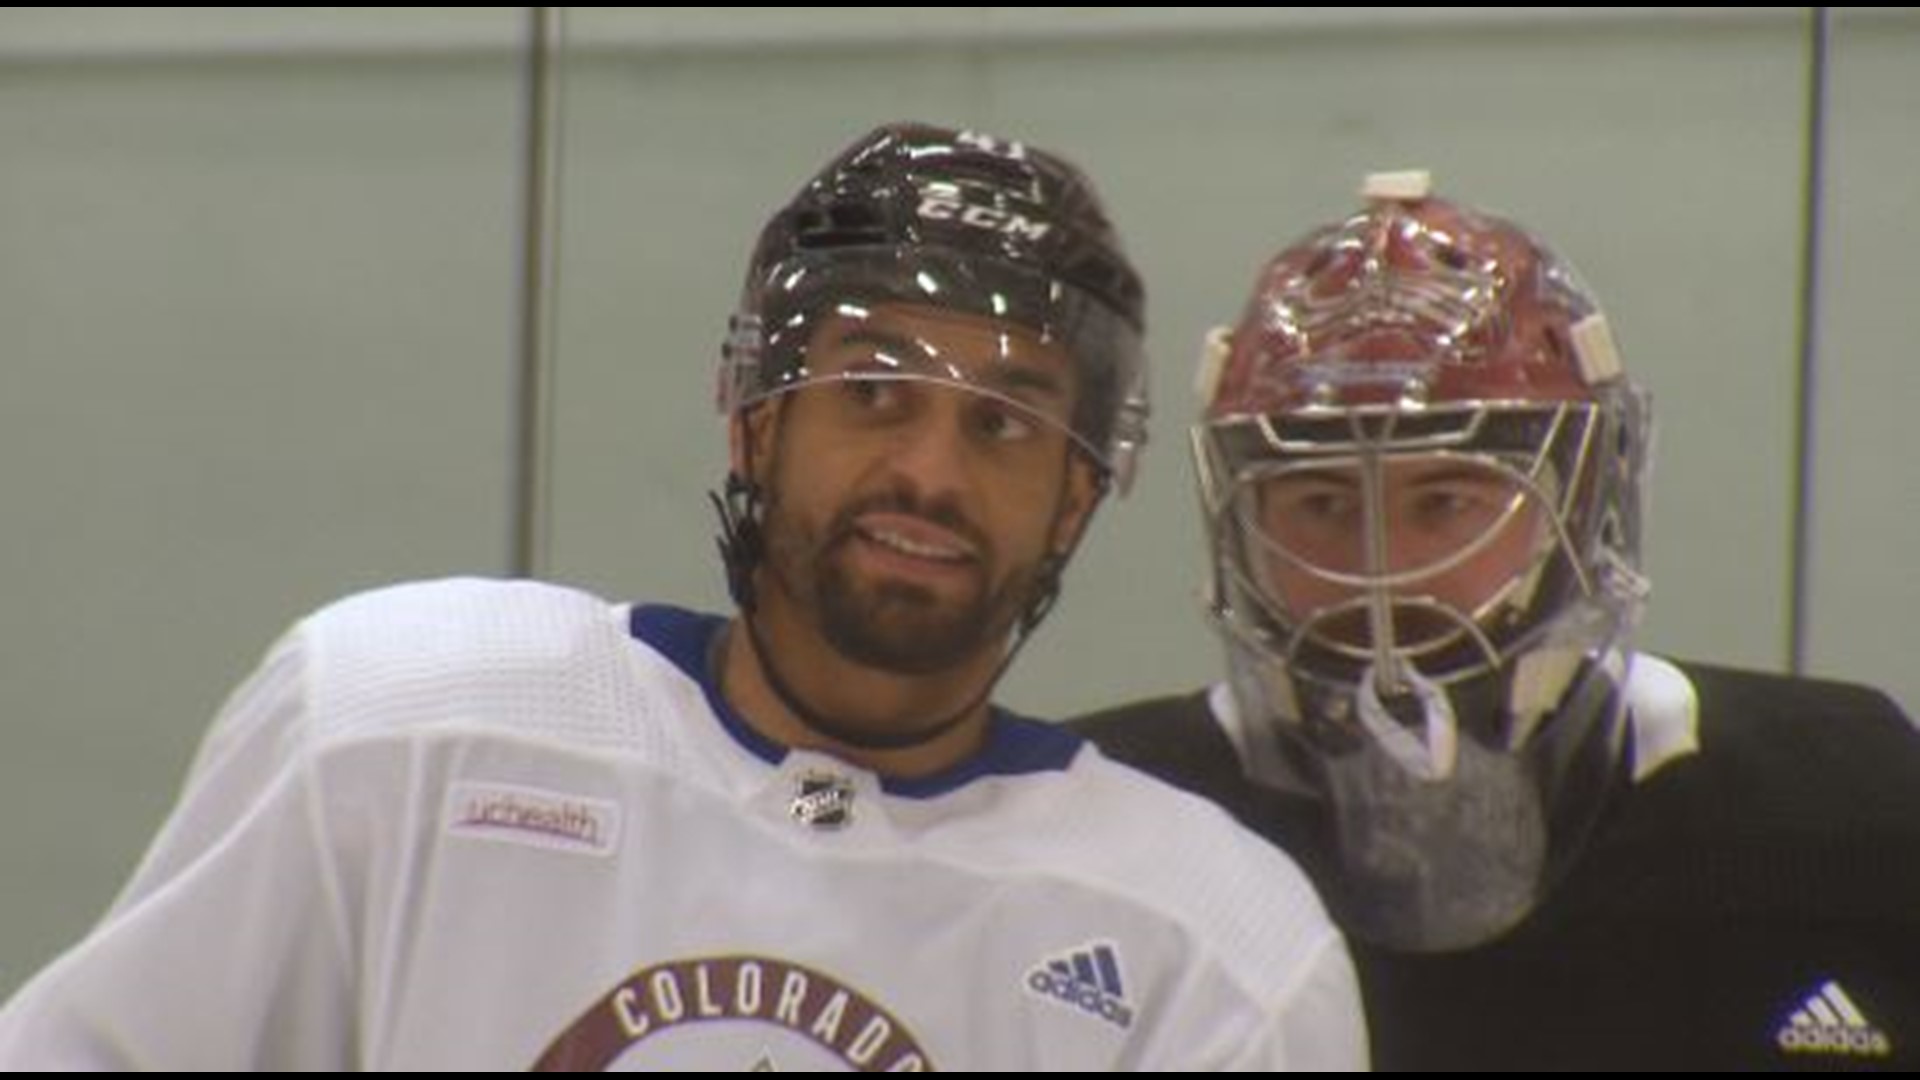 It's difficult fitting in to a new locker room. The newly acquired center Pierre-Édouard Bellemare has a unique way of connecting with his Avalanche teammates.